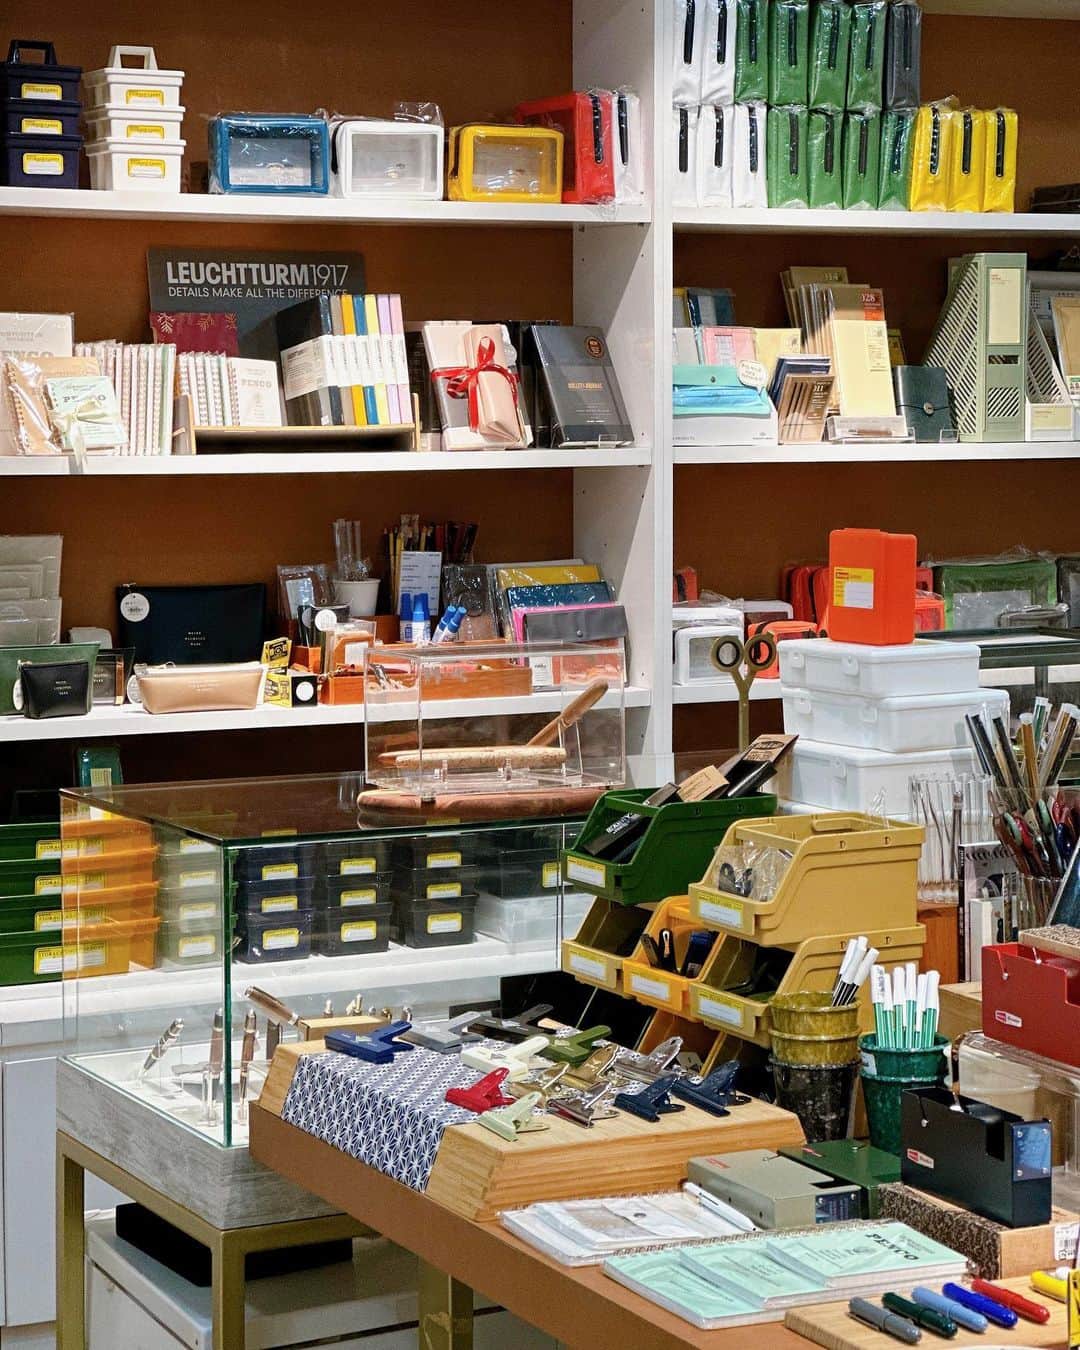 Stationery stores in Klang Valley - Ninth Gallery